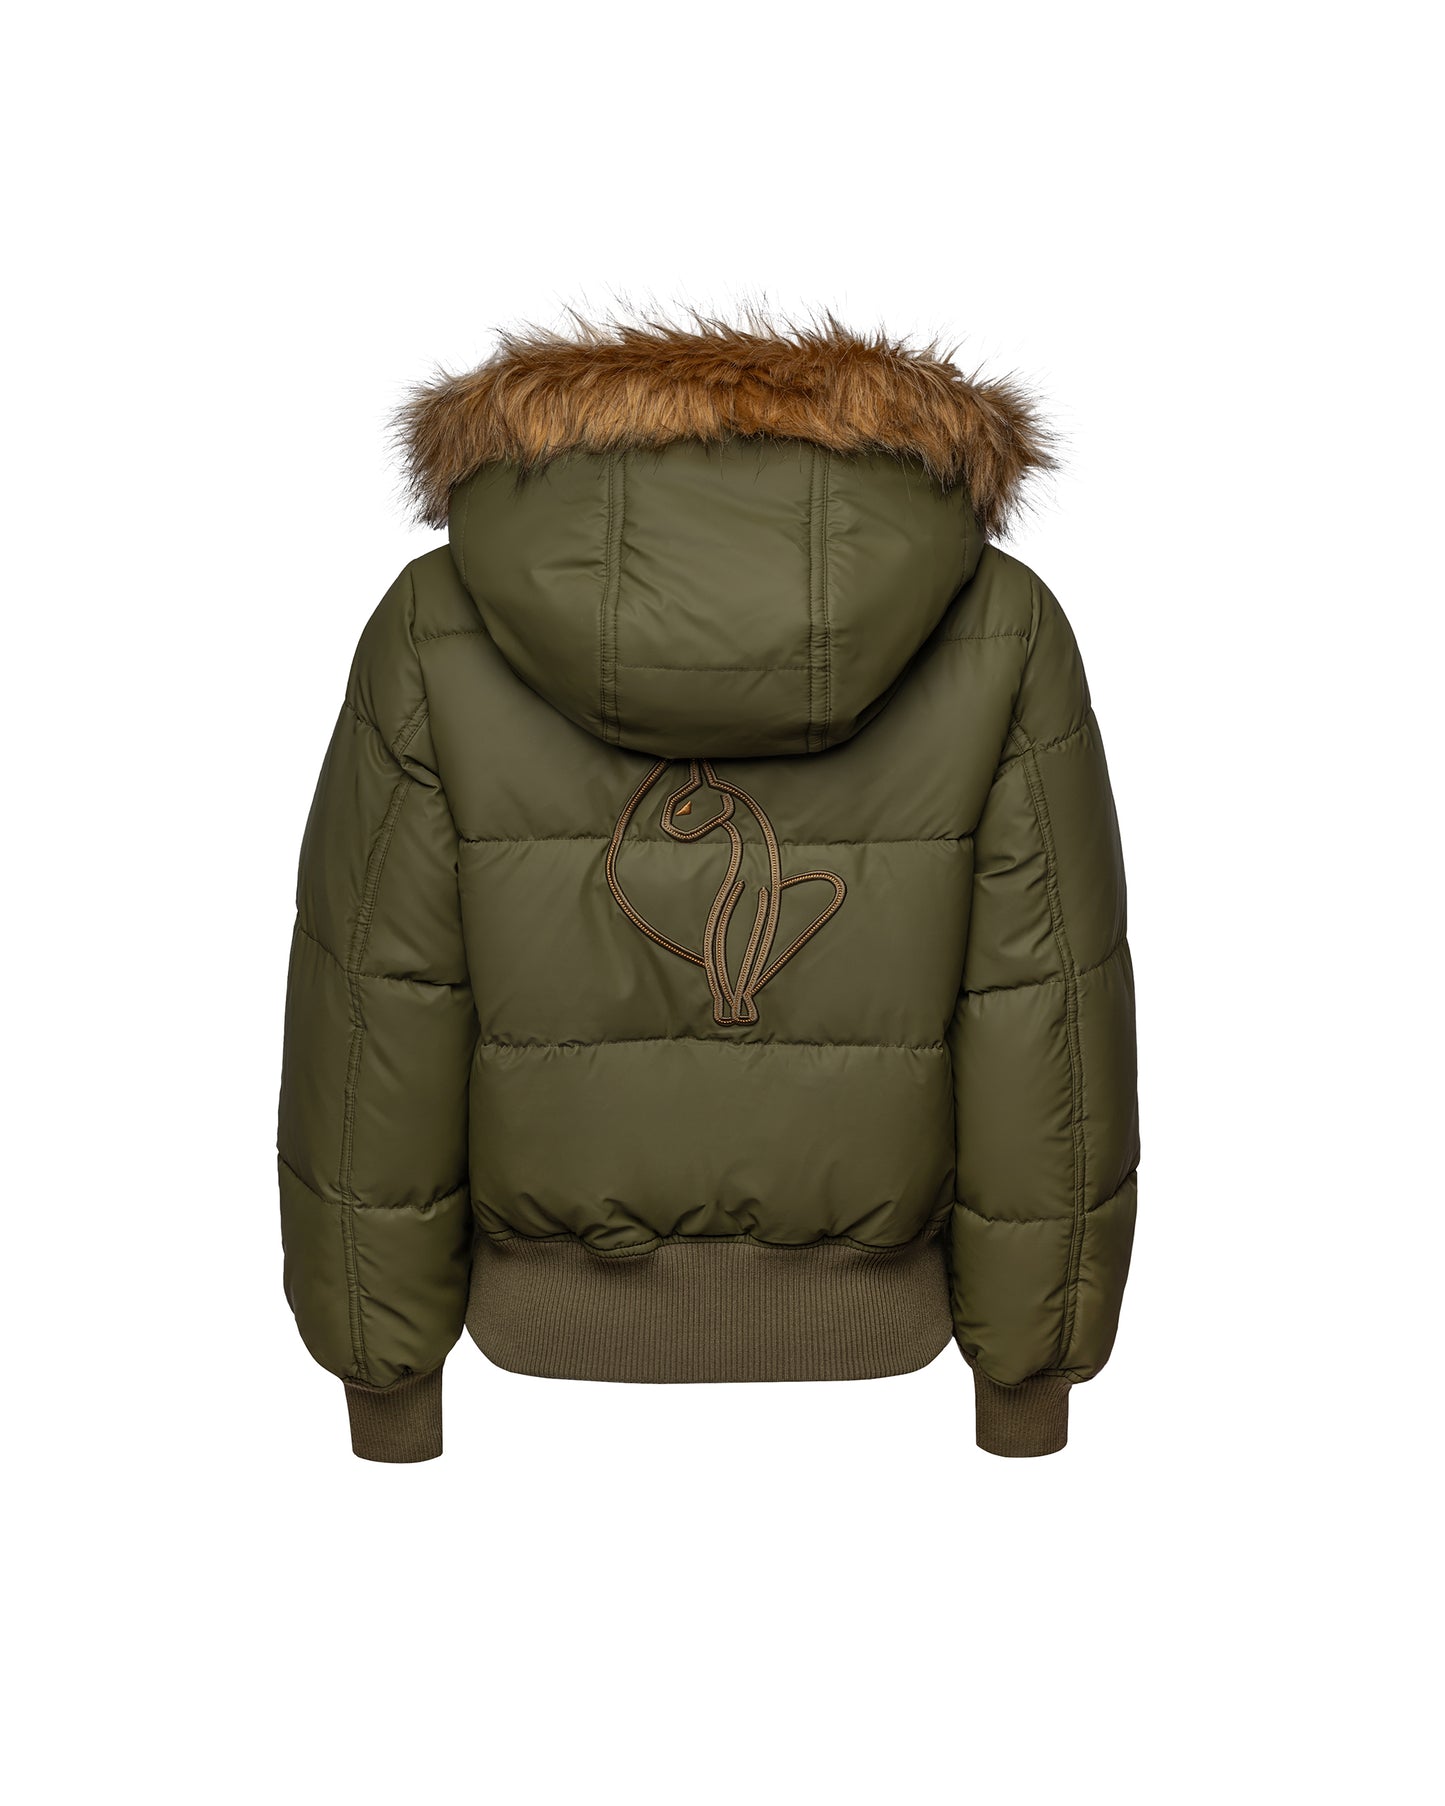 Baby Phat reissue OG puffer jacket in olive is an olive green jacket that features a faux fur trim hood, cat logo detailing on the front and back, gold buttons, and a cat zipper pull.